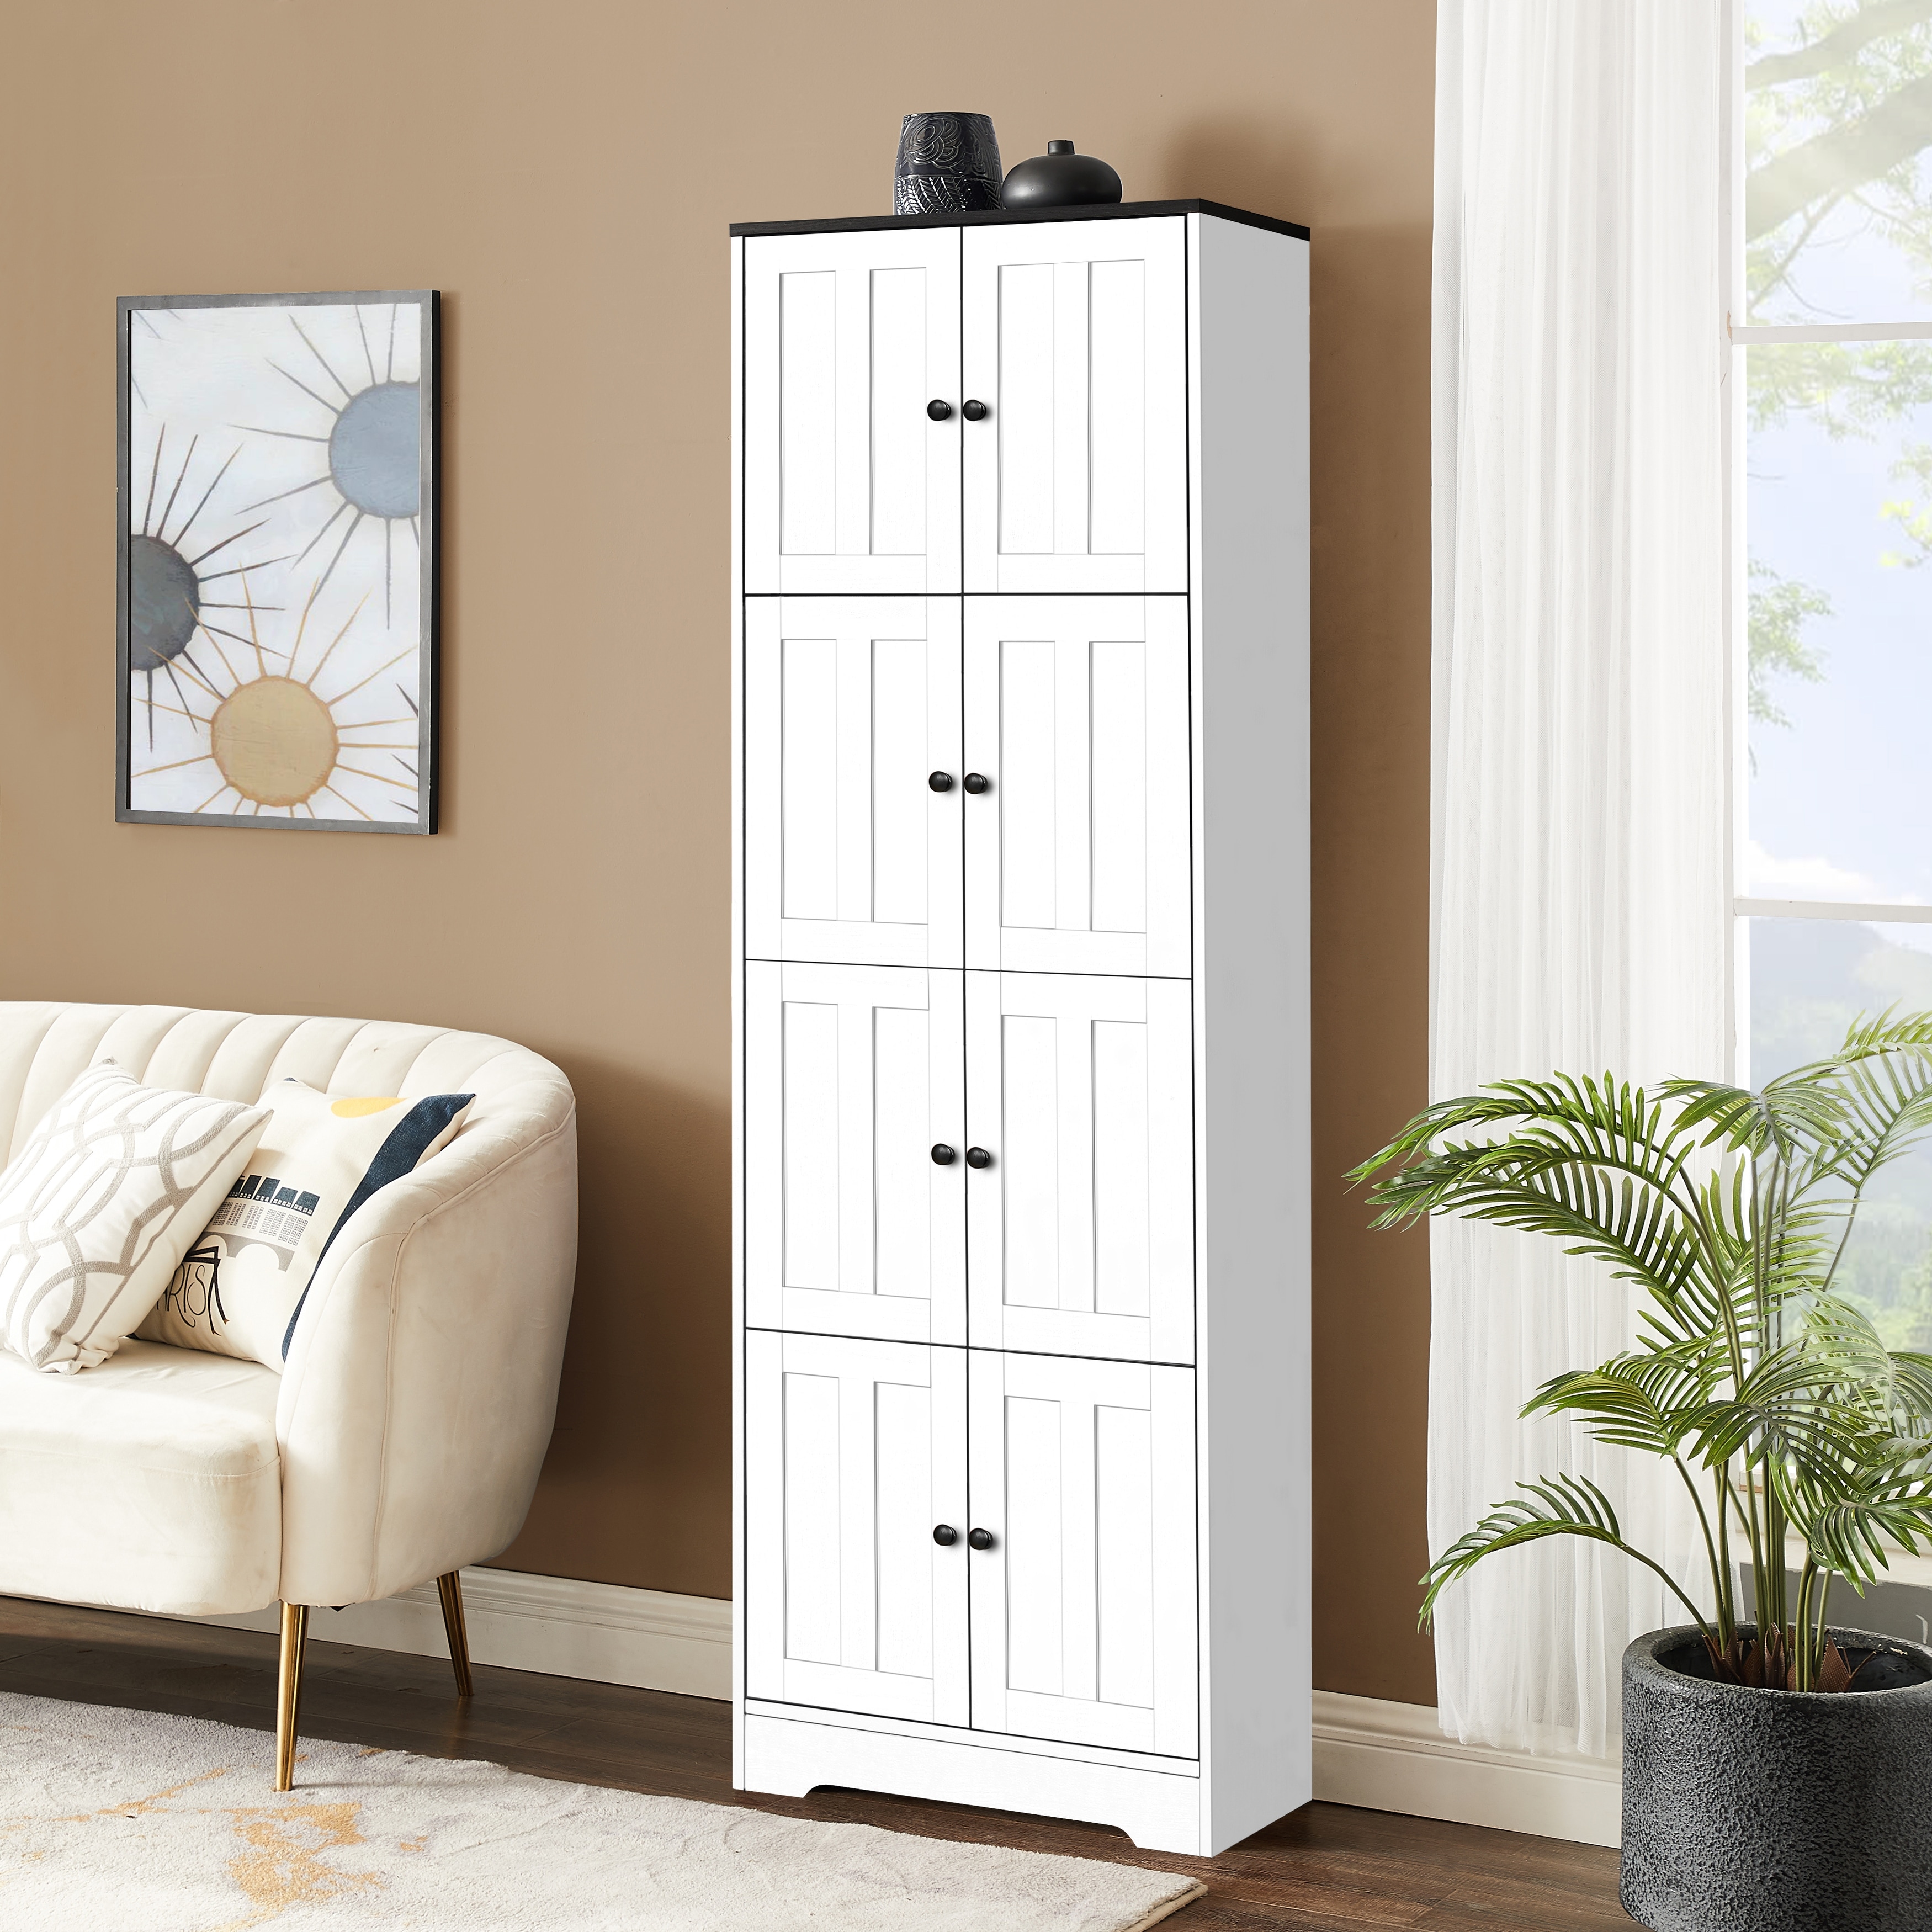 https://ak1.ostkcdn.com/images/products/is/images/direct/b79d2101d7ccdc11901de347a9de2b3899fa1ff5/Tall-Storage-Cabinet-with-4-Shelves-for-Living-Room%2C-Kitchen.jpg